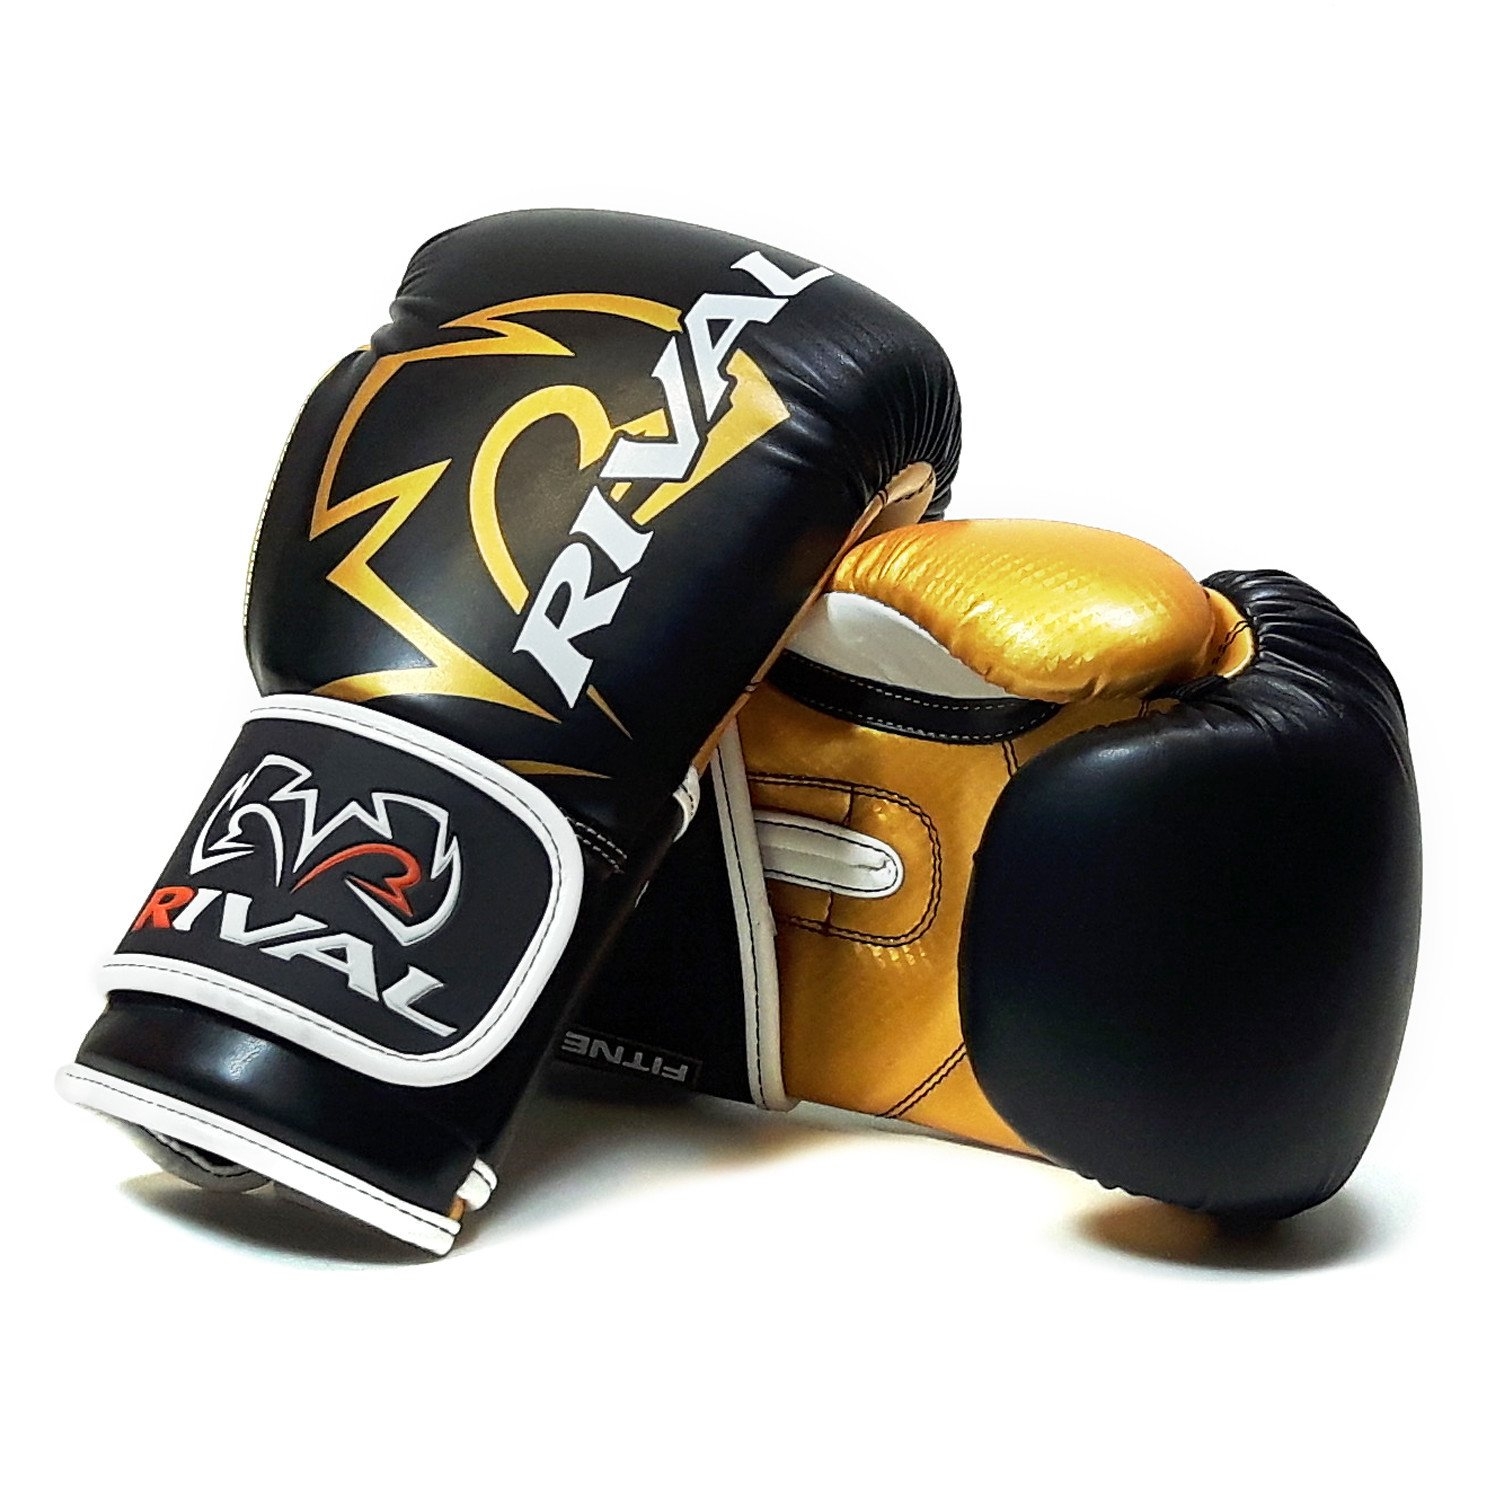 Rival Rb7 Fitness Bag Training Boxing Gloves Black Gold  – Size: 16 – Adult – Unisex